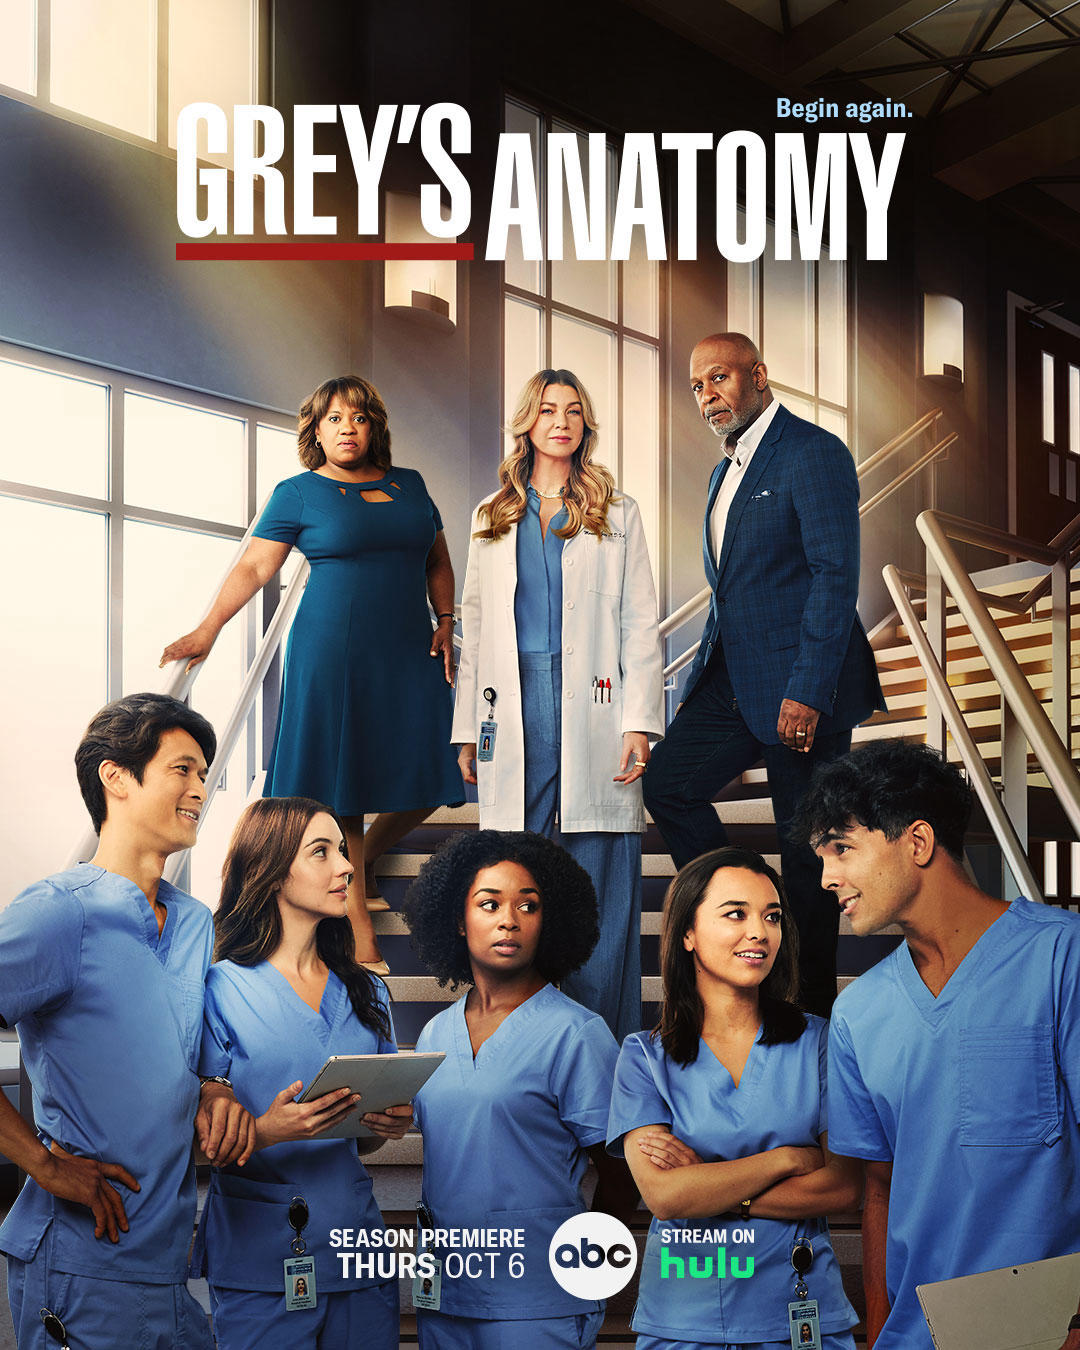 Grey's Anatomy Official - On a Thursday, in a stairway, I watched it begin again